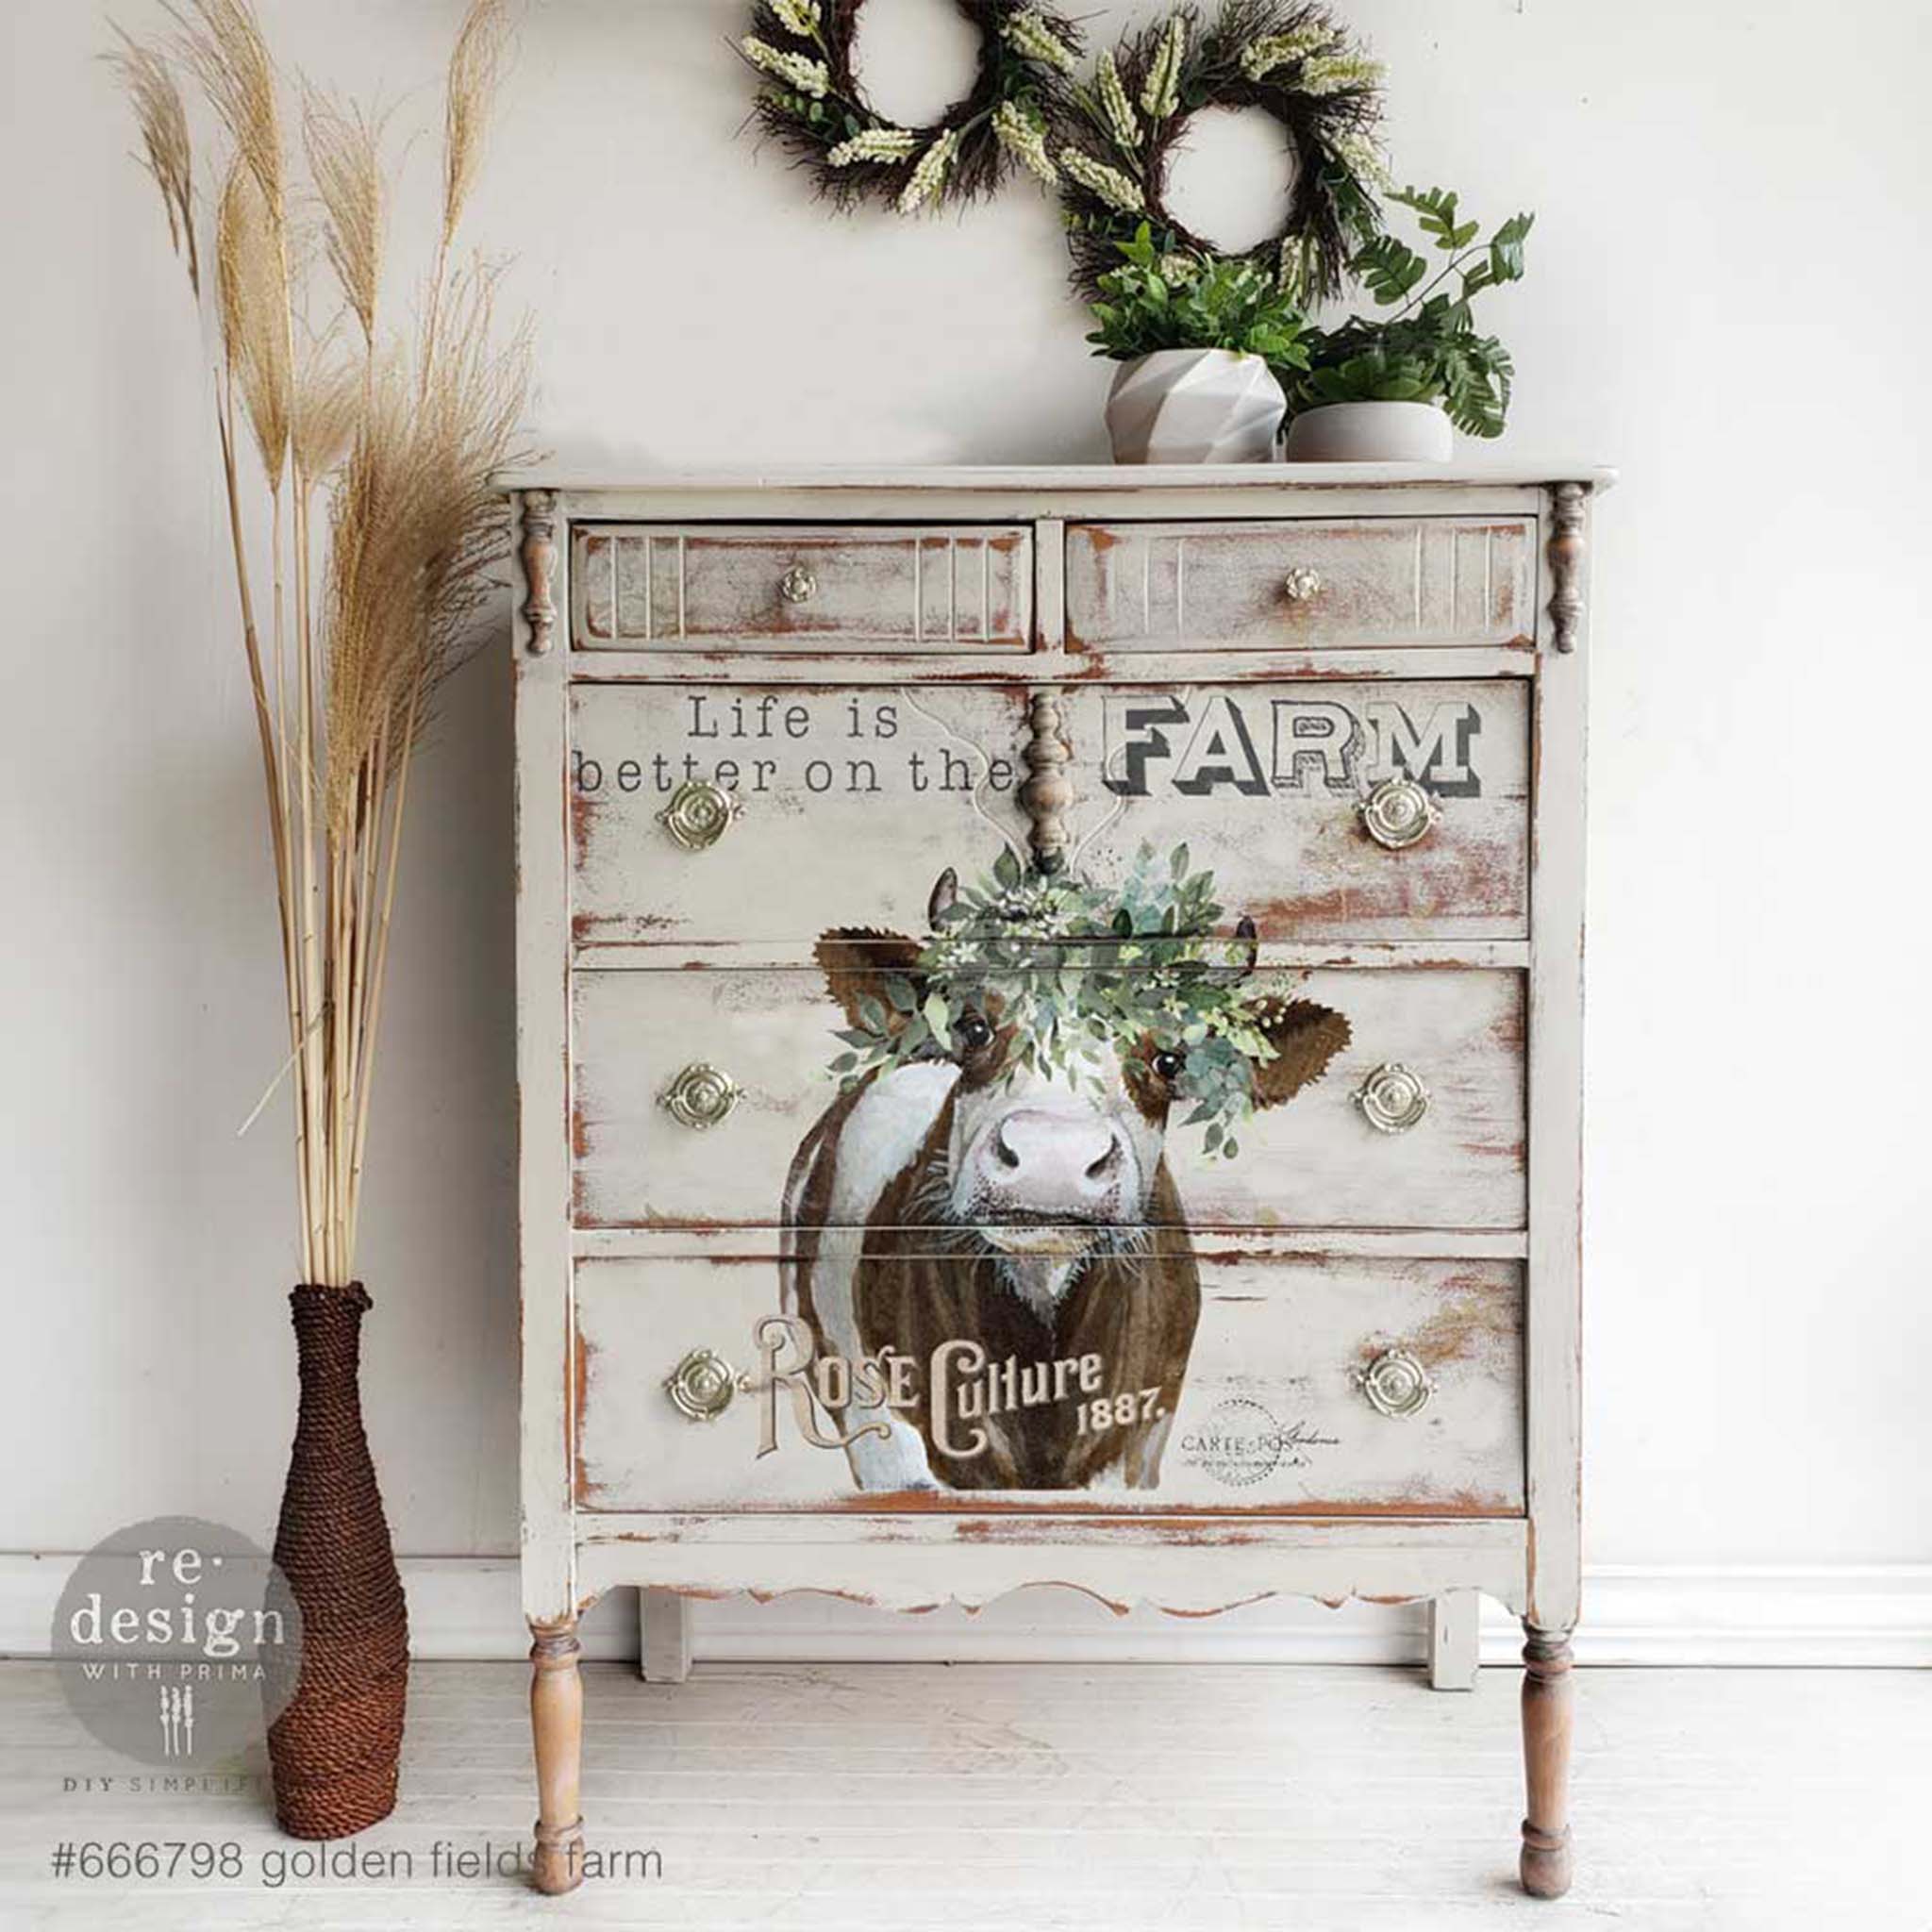 A vintage 5-drawer dresser is painted distressed grey and features ReDesign with Prima's Golden Fields Farm rub-on transfer on the bottom 4 drawers.